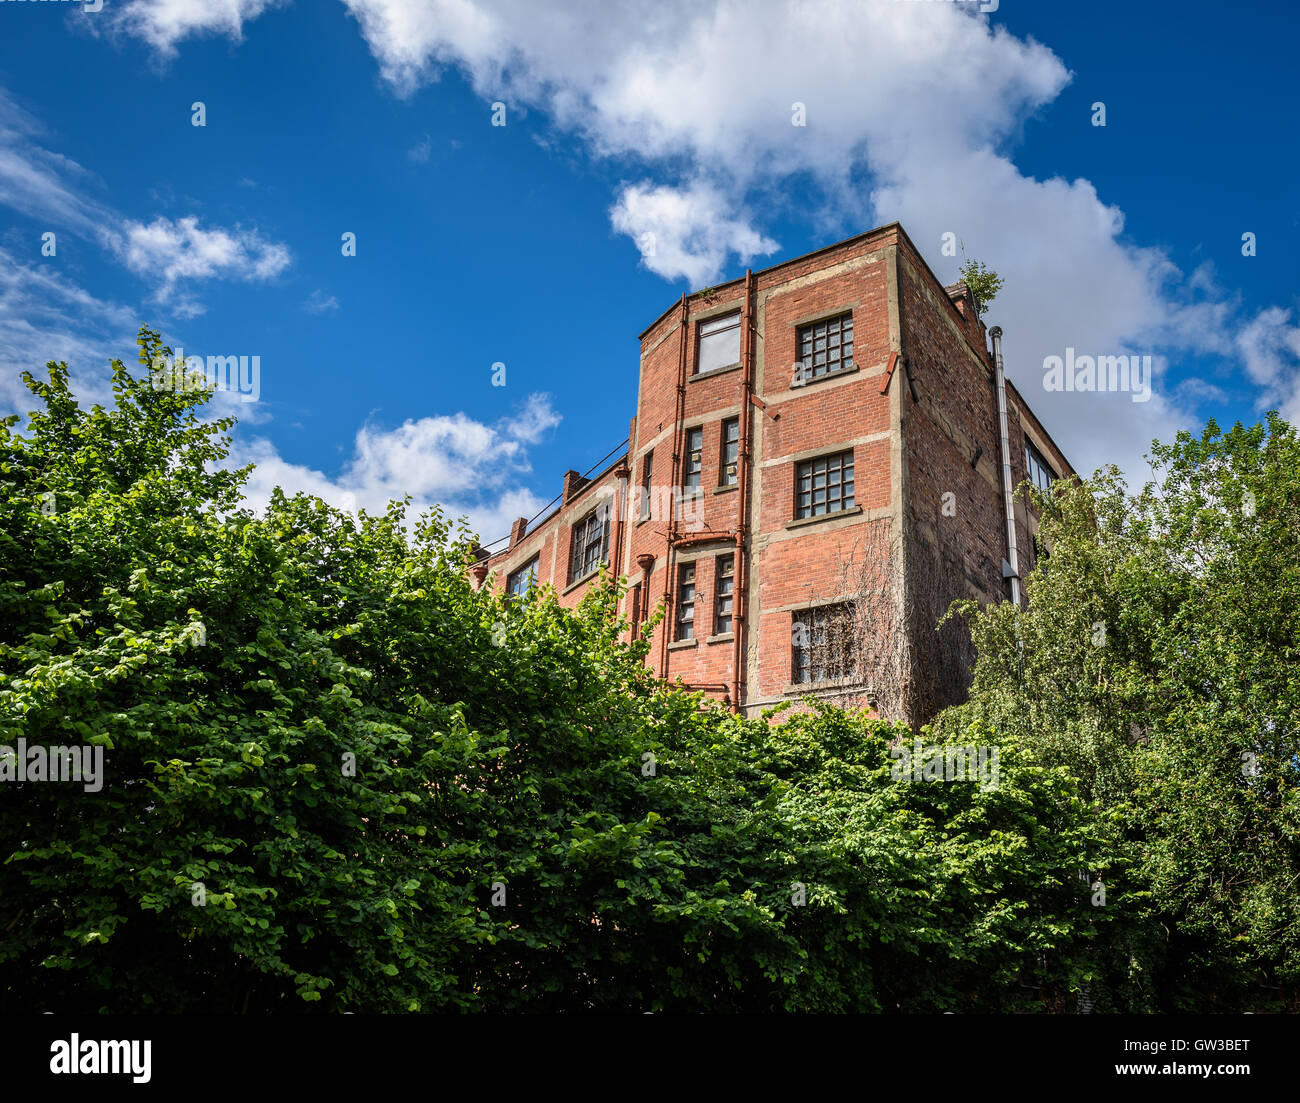 Urban brick building isolated by green bushes. Stock Photo